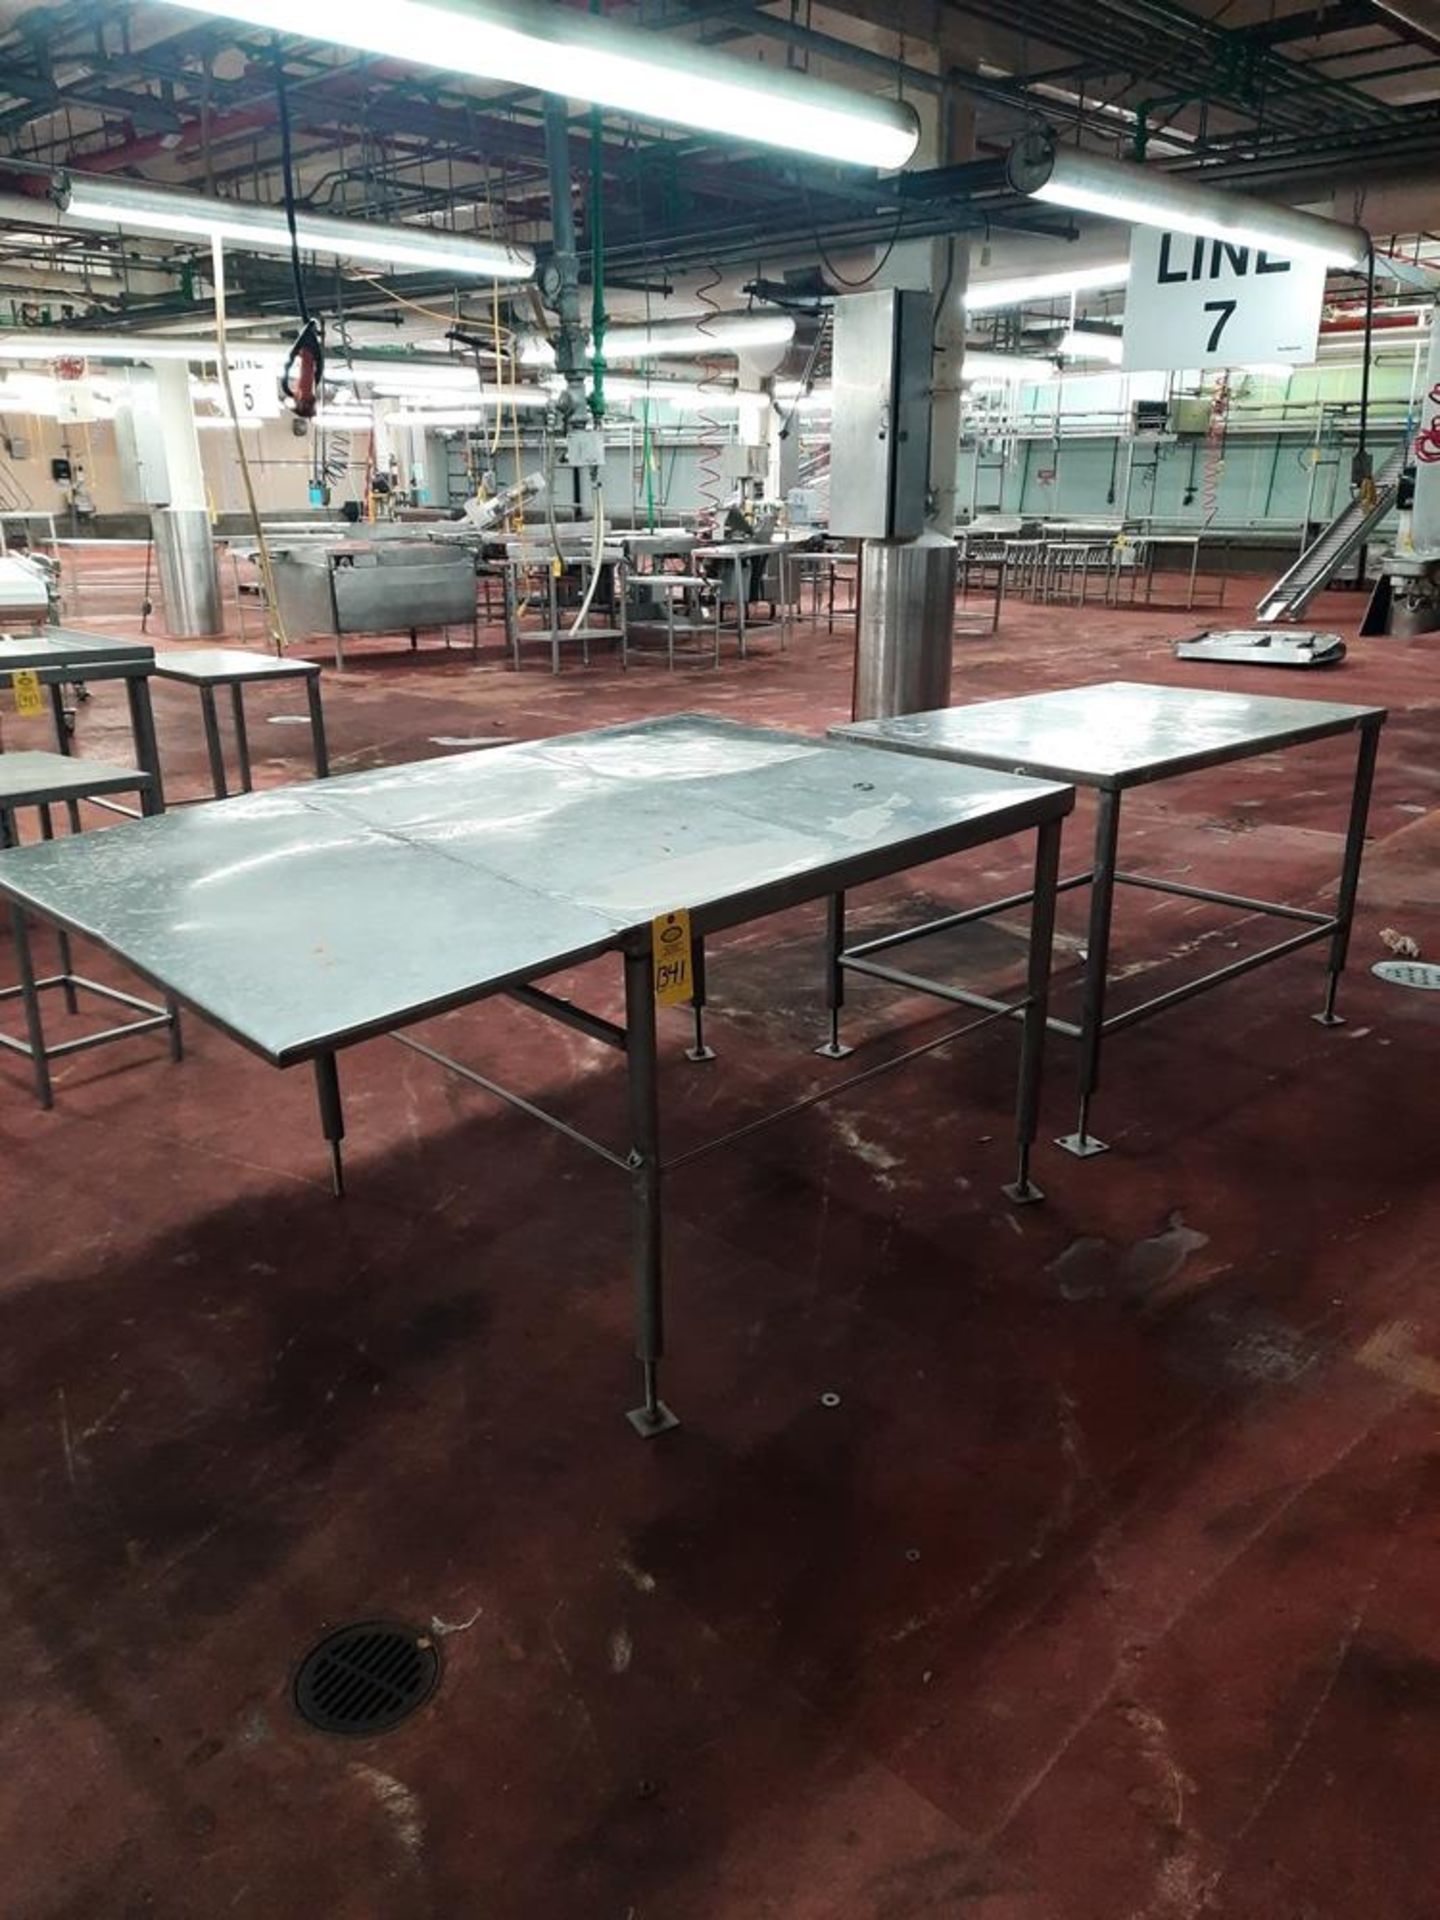 Lot Stainless Steel Tables, (1) 4' W X 6' L, (1) 3' W X 58" L: Required Loading Fee $75.00, Rigger-